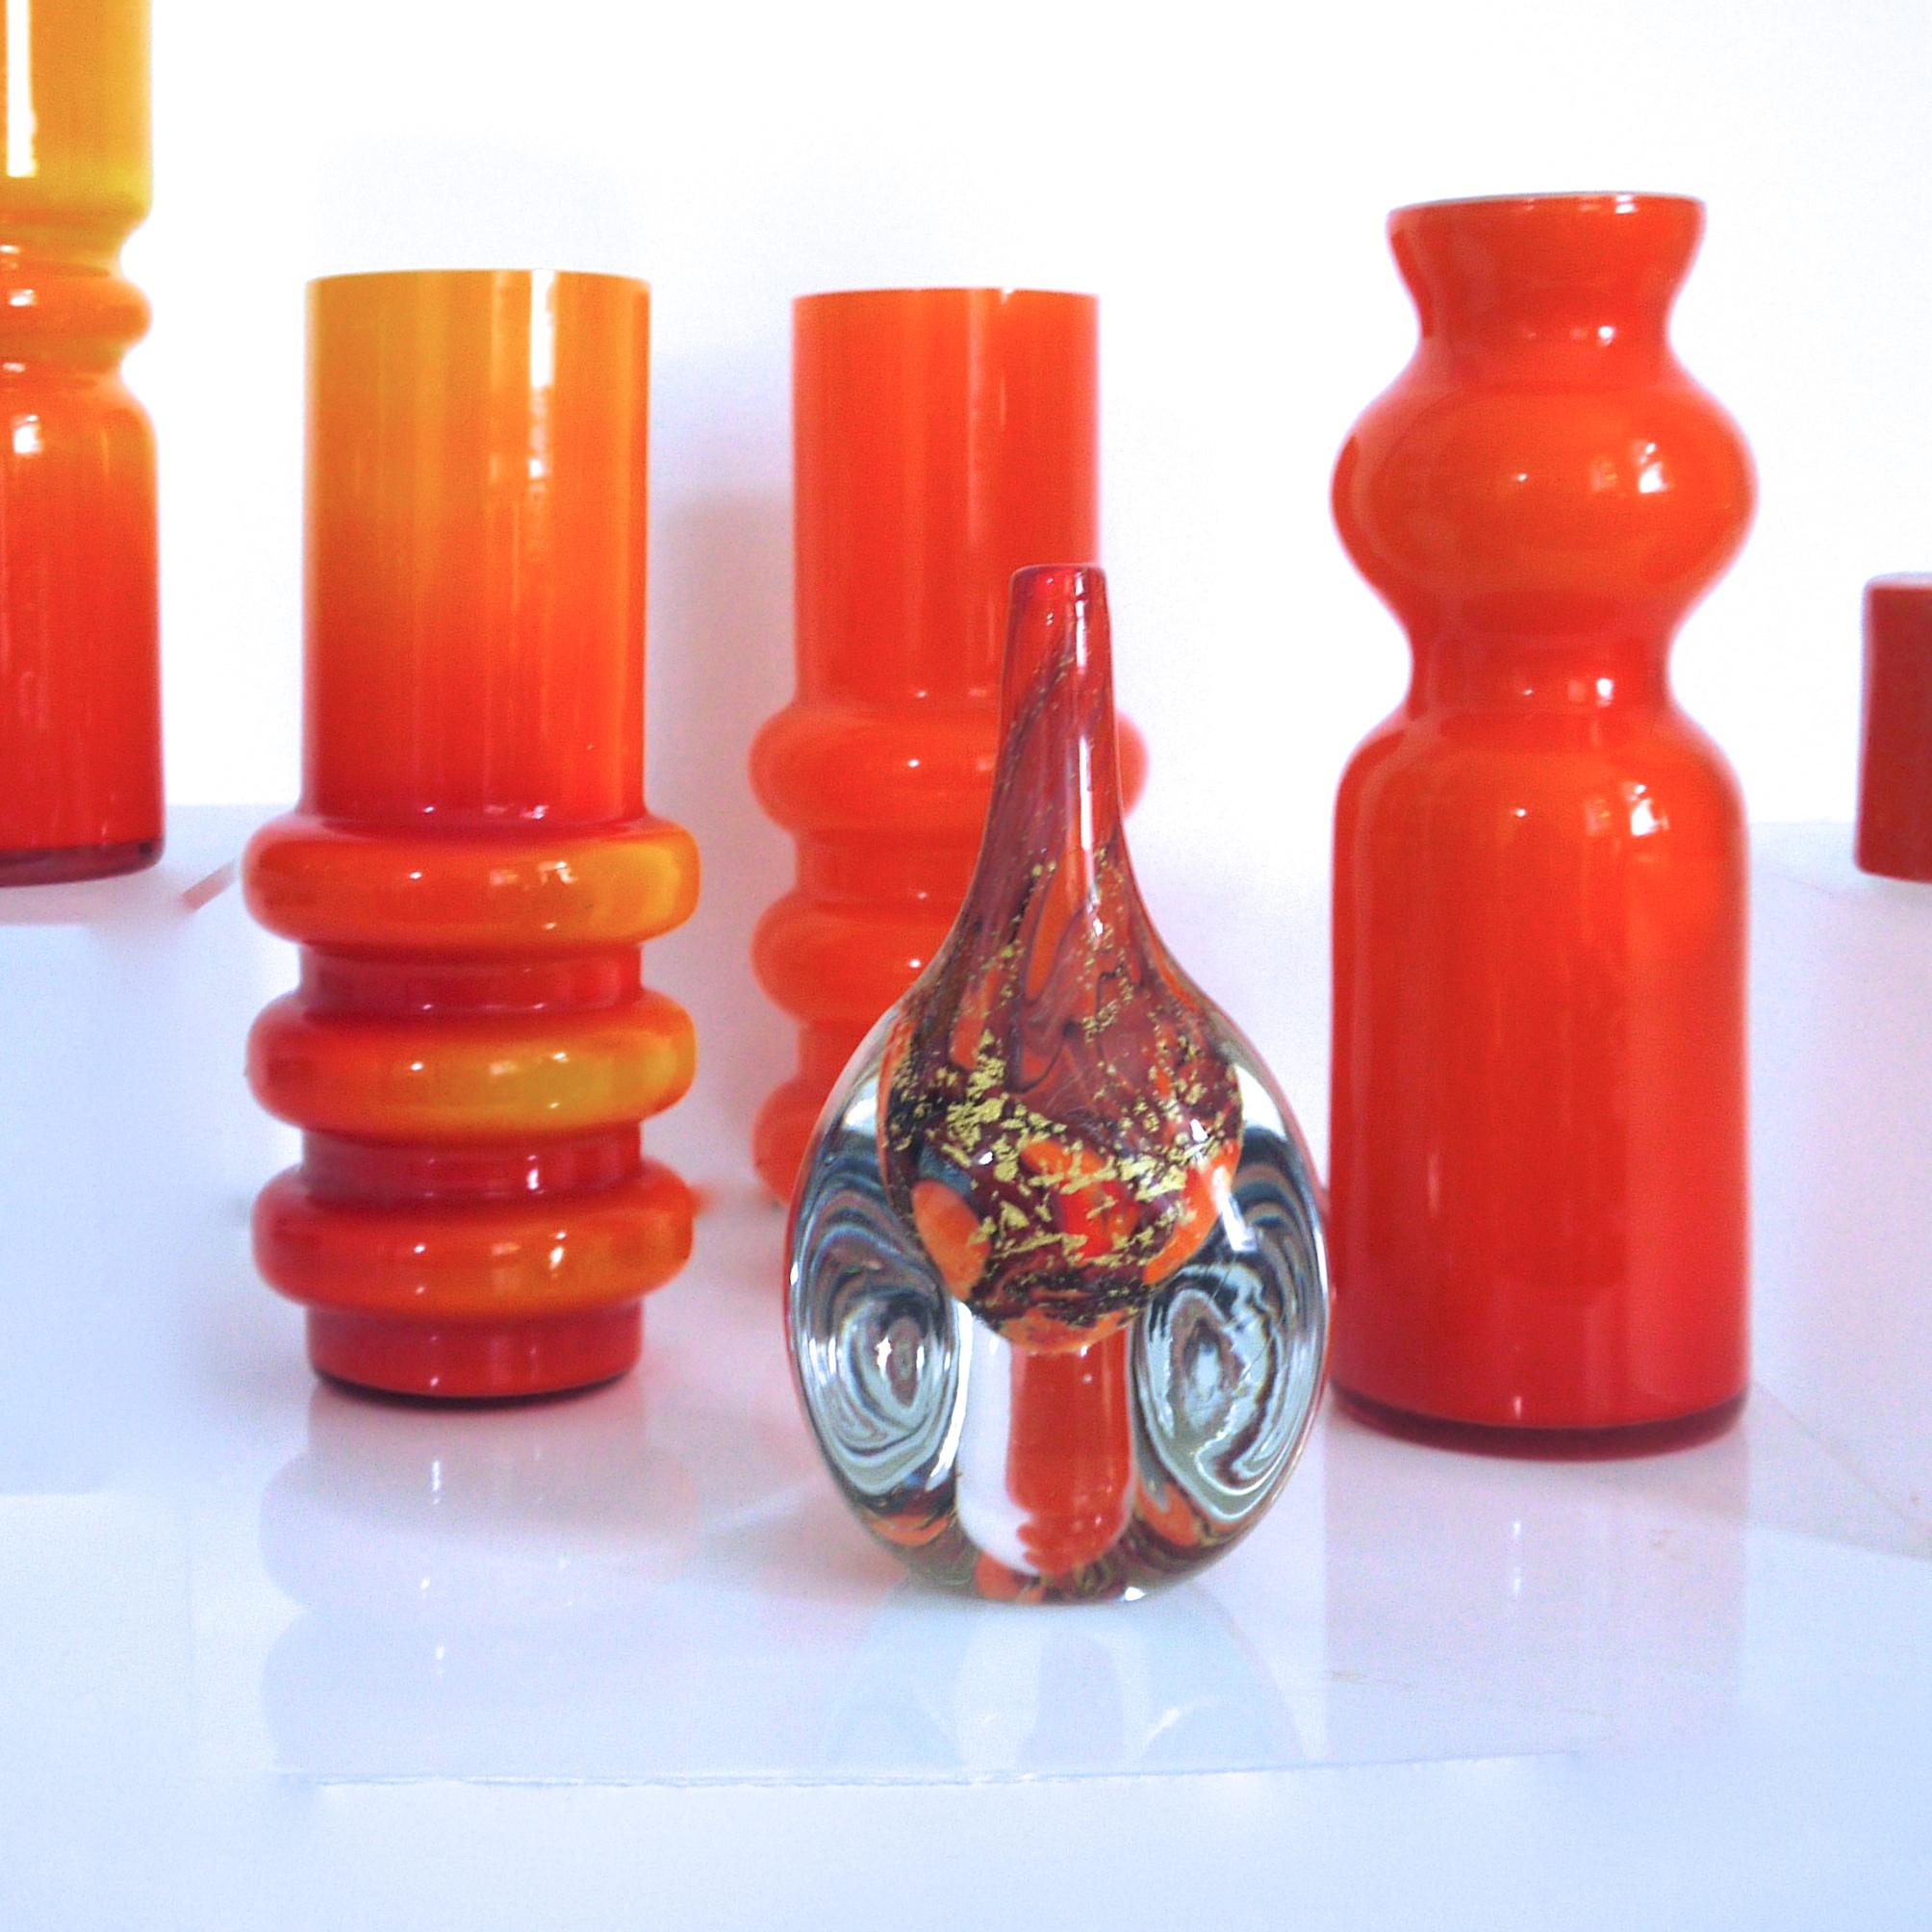 Scandinavian Modern Collection of Orange Hooped Glass Vases by Ryd, Mid-1970s For Sale 2